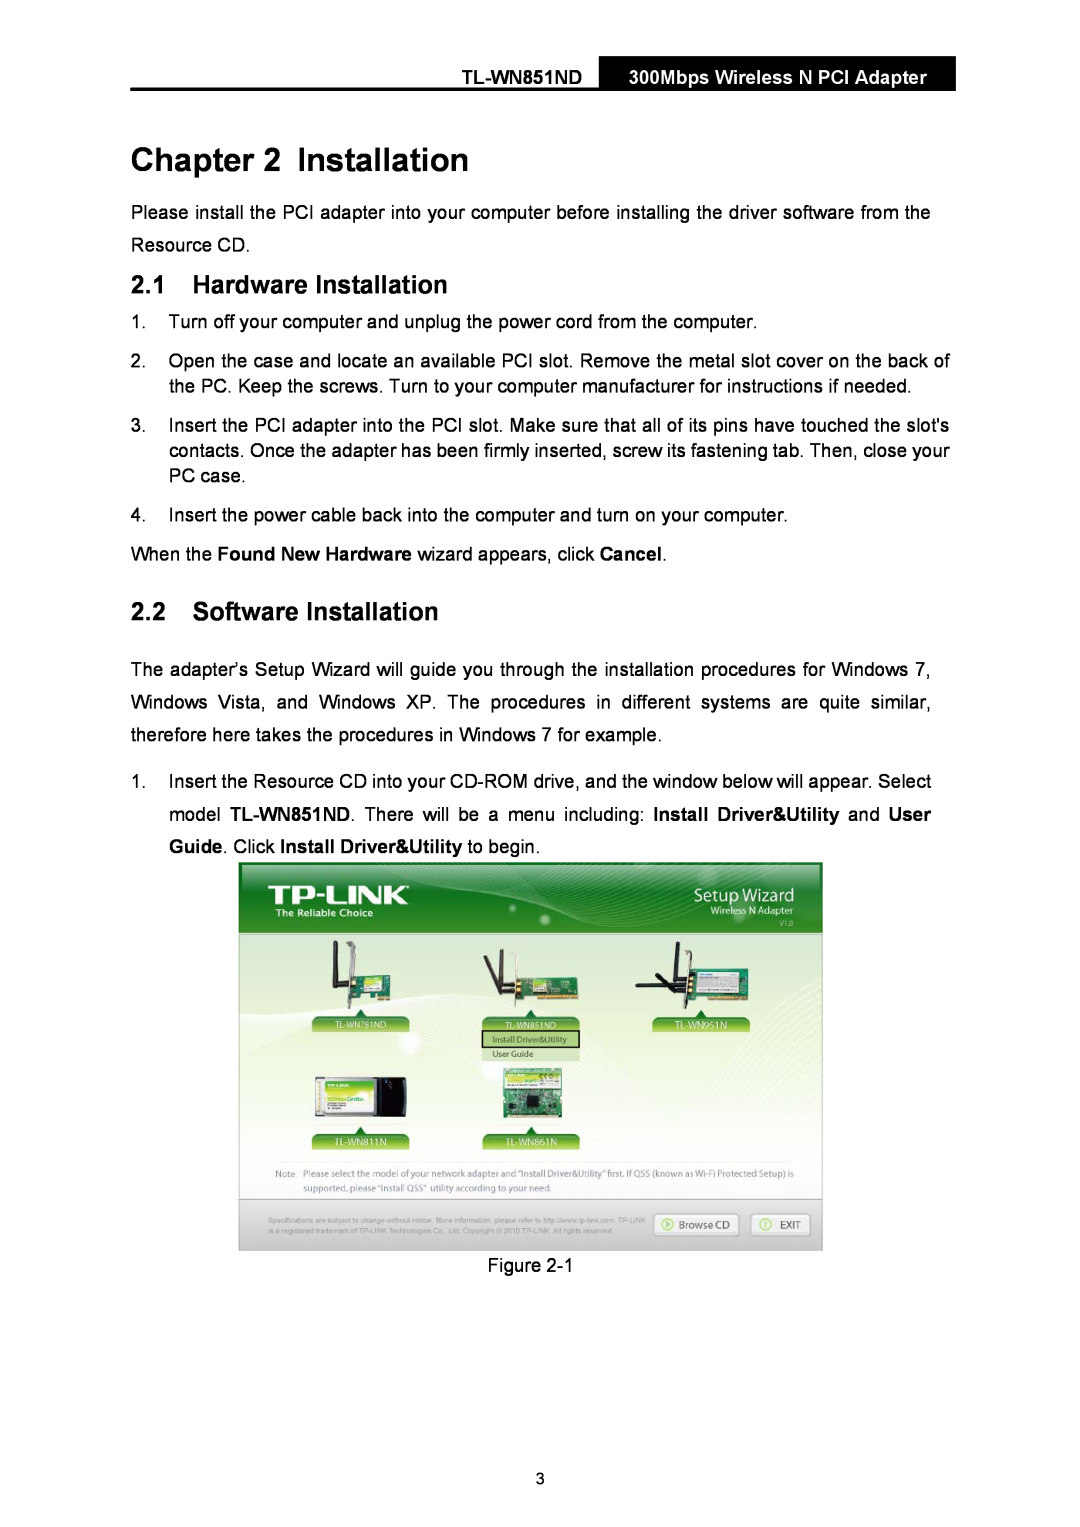 TP-Link TL-WN851ND manual Hardware Installation, Software Installation, 300Mbps Wireless N PCI Adapter 